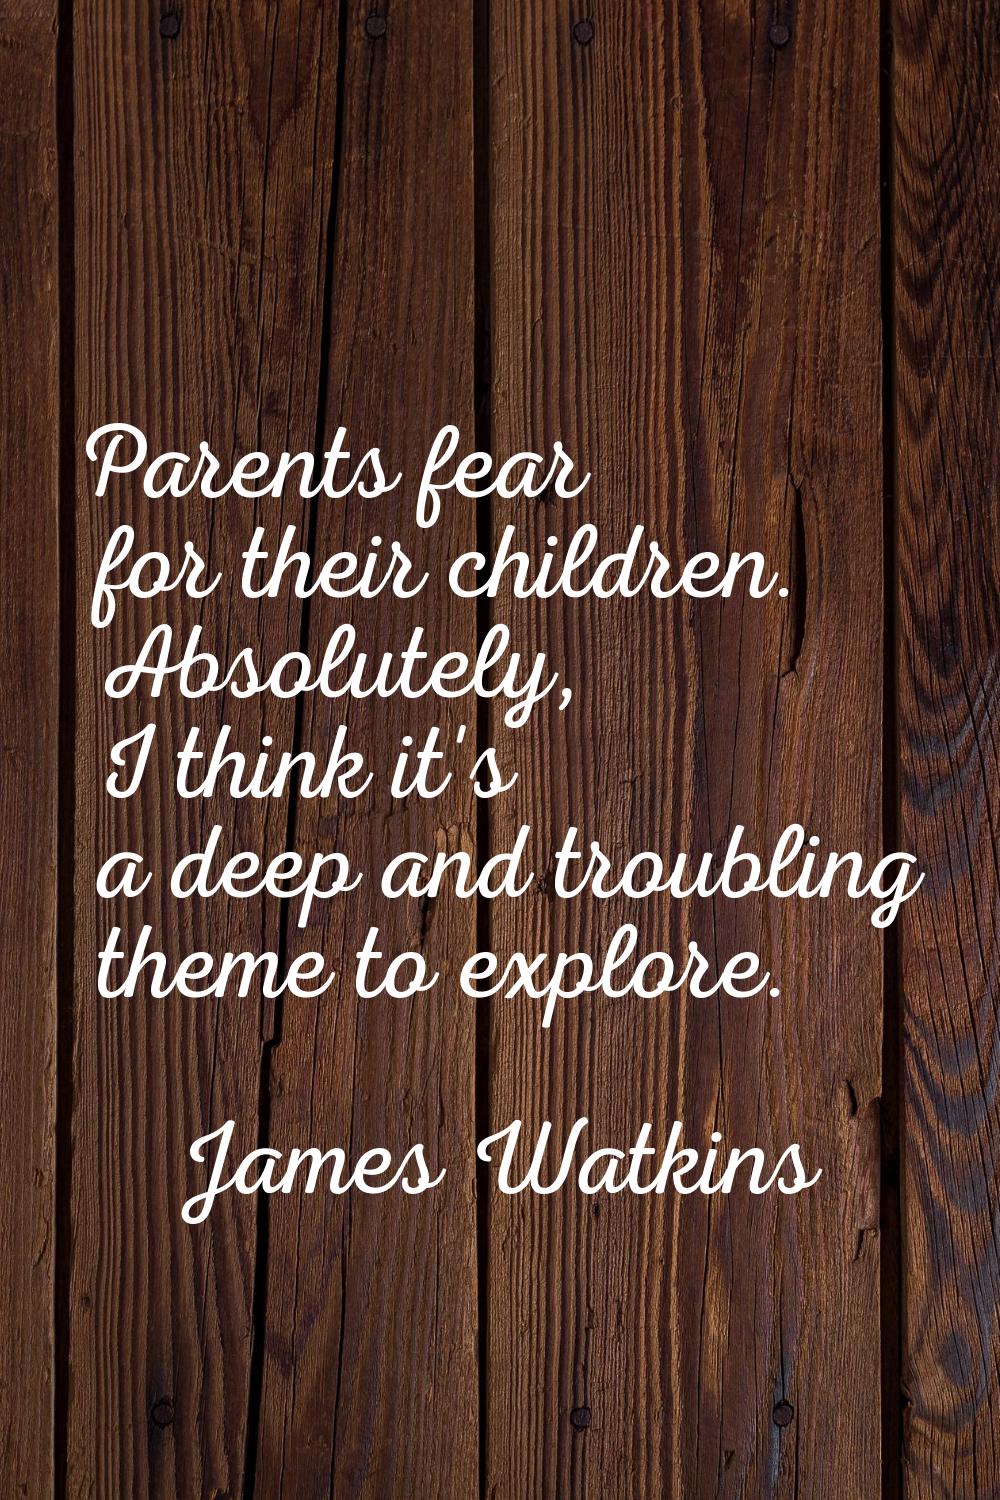 Parents fear for their children. Absolutely, I think it's a deep and troubling theme to explore.